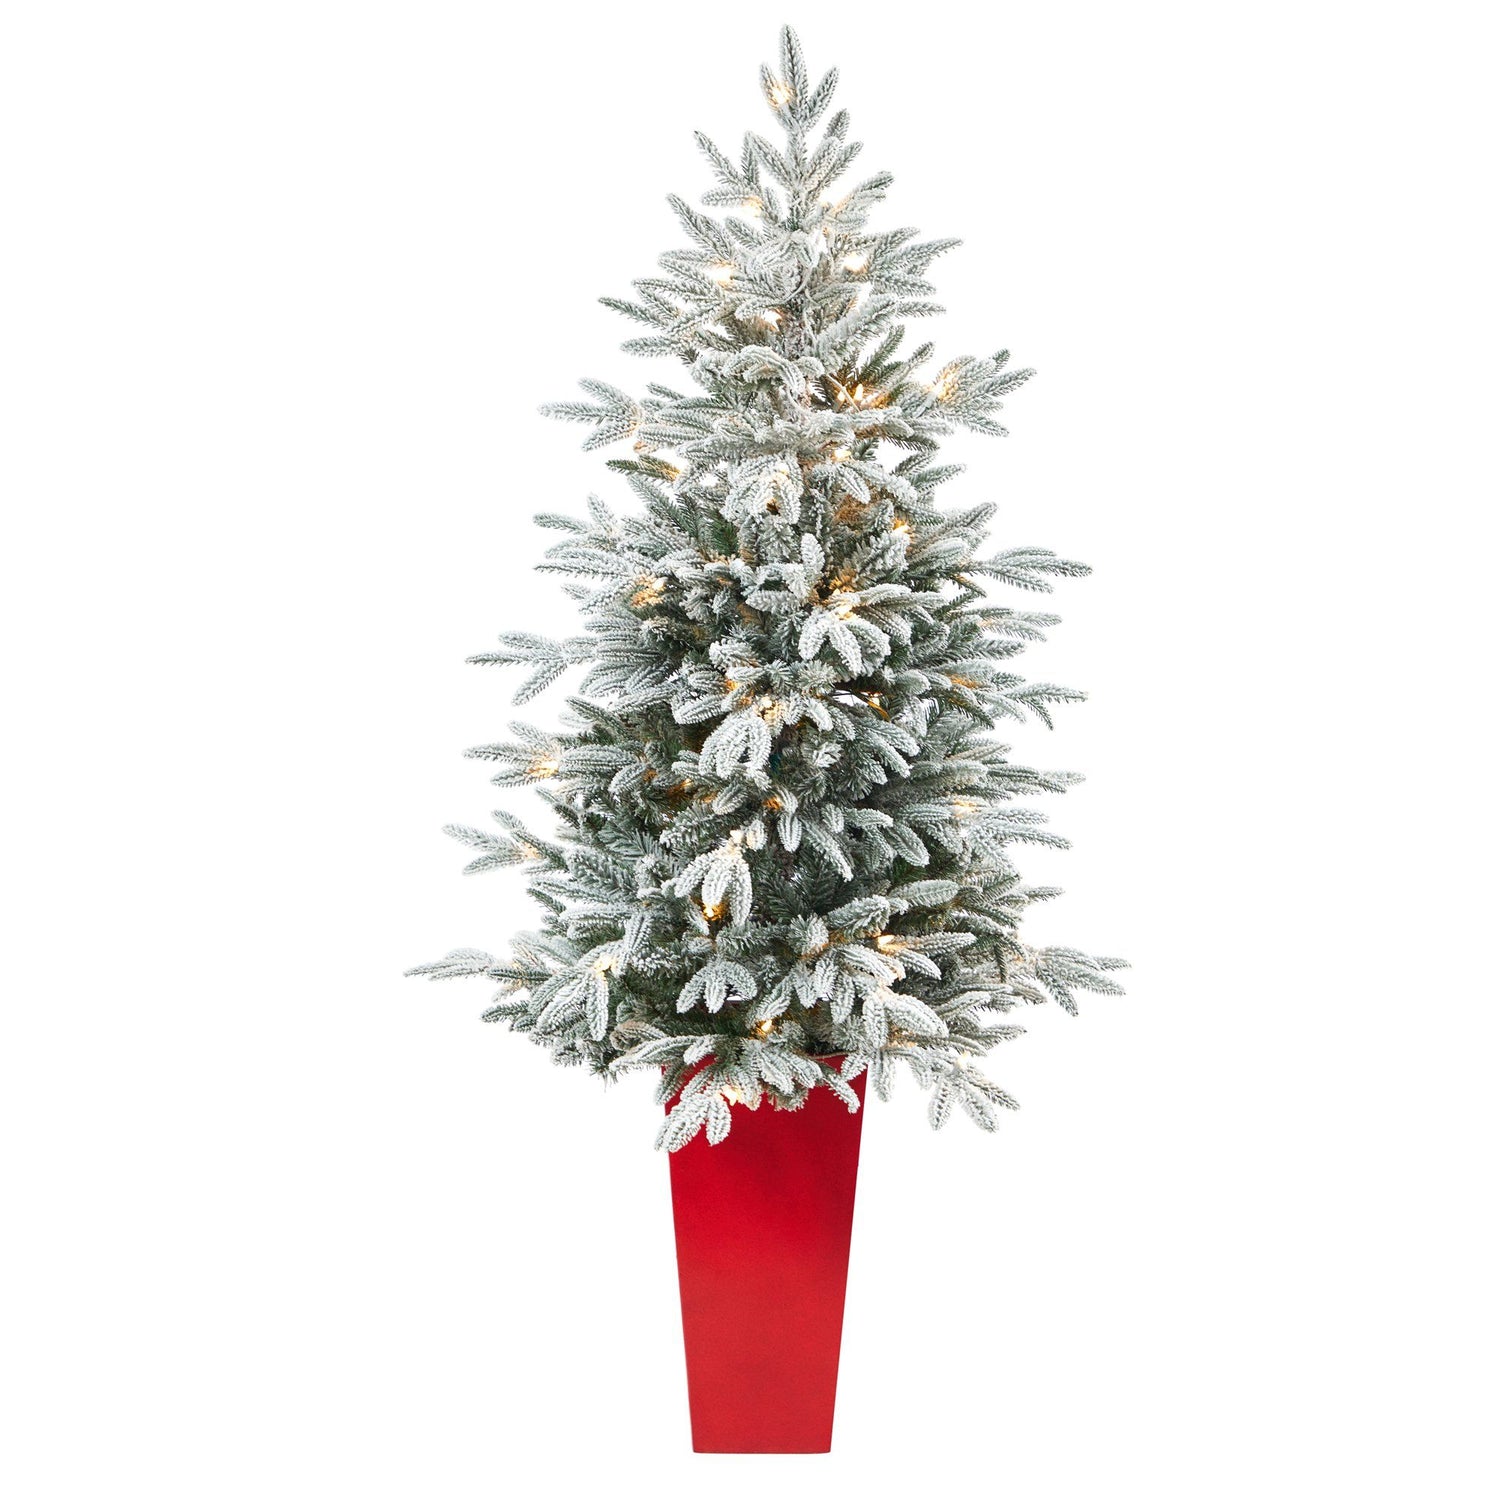 5’ Flocked Manchester Spruce Artificial Christmas Tree with 100 Lights and 357 Bendable Branches in Red Tower Planter